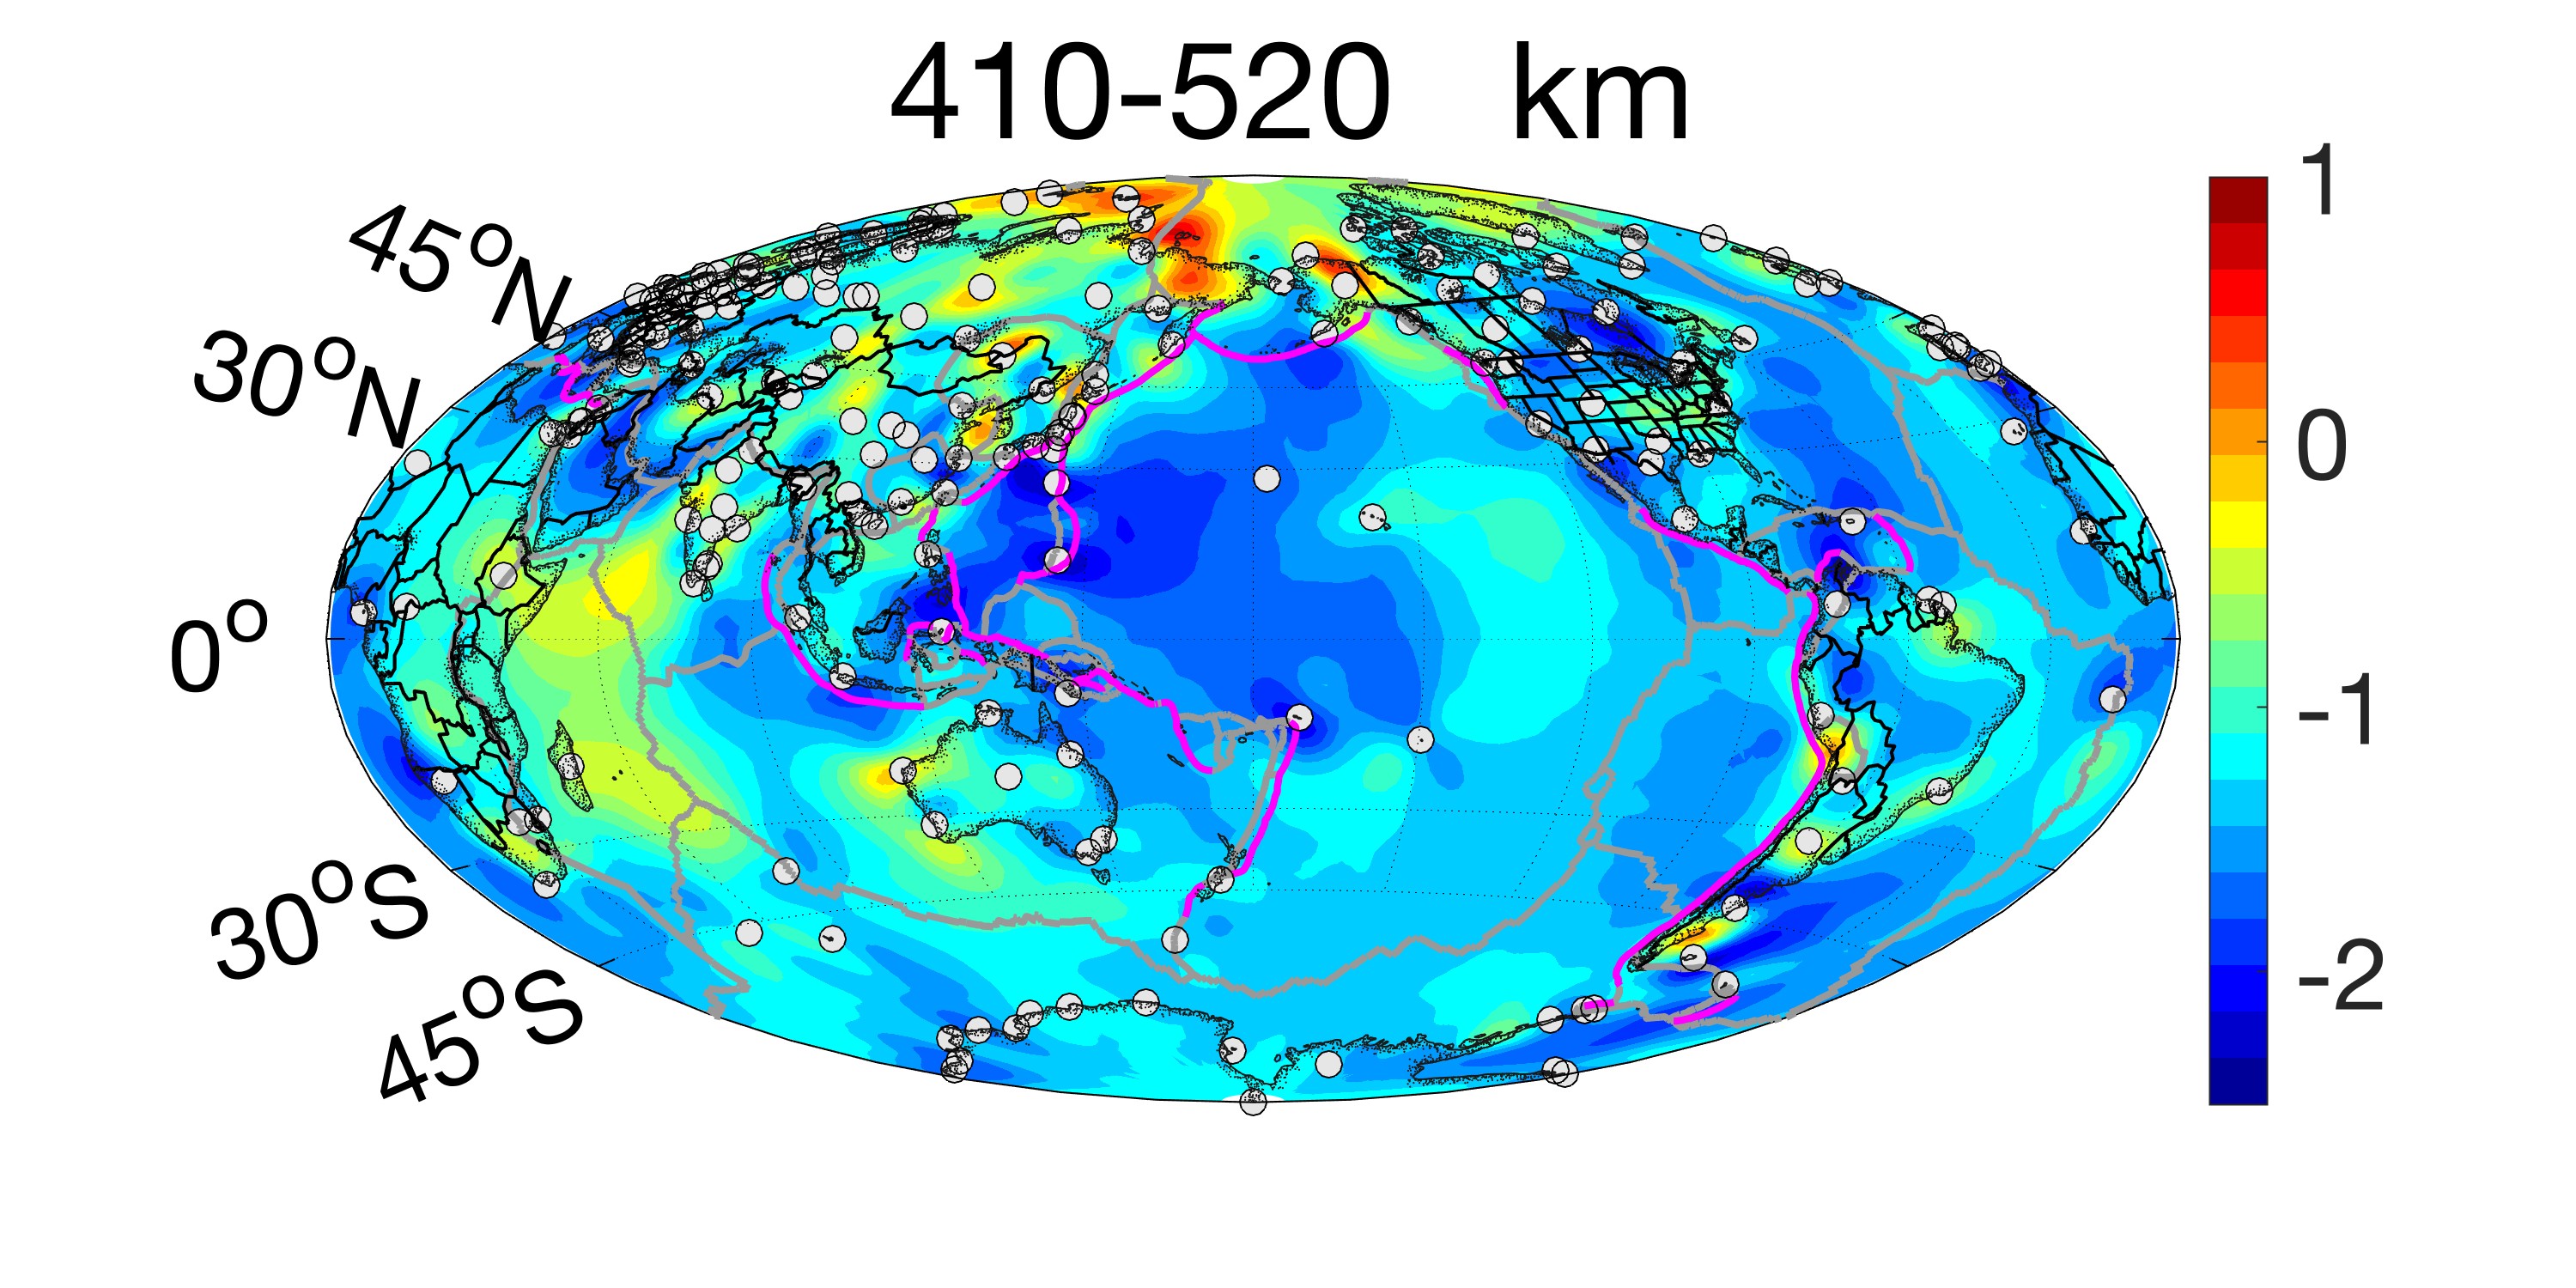 Plot of sigma at the depth of 410 to 520 km.